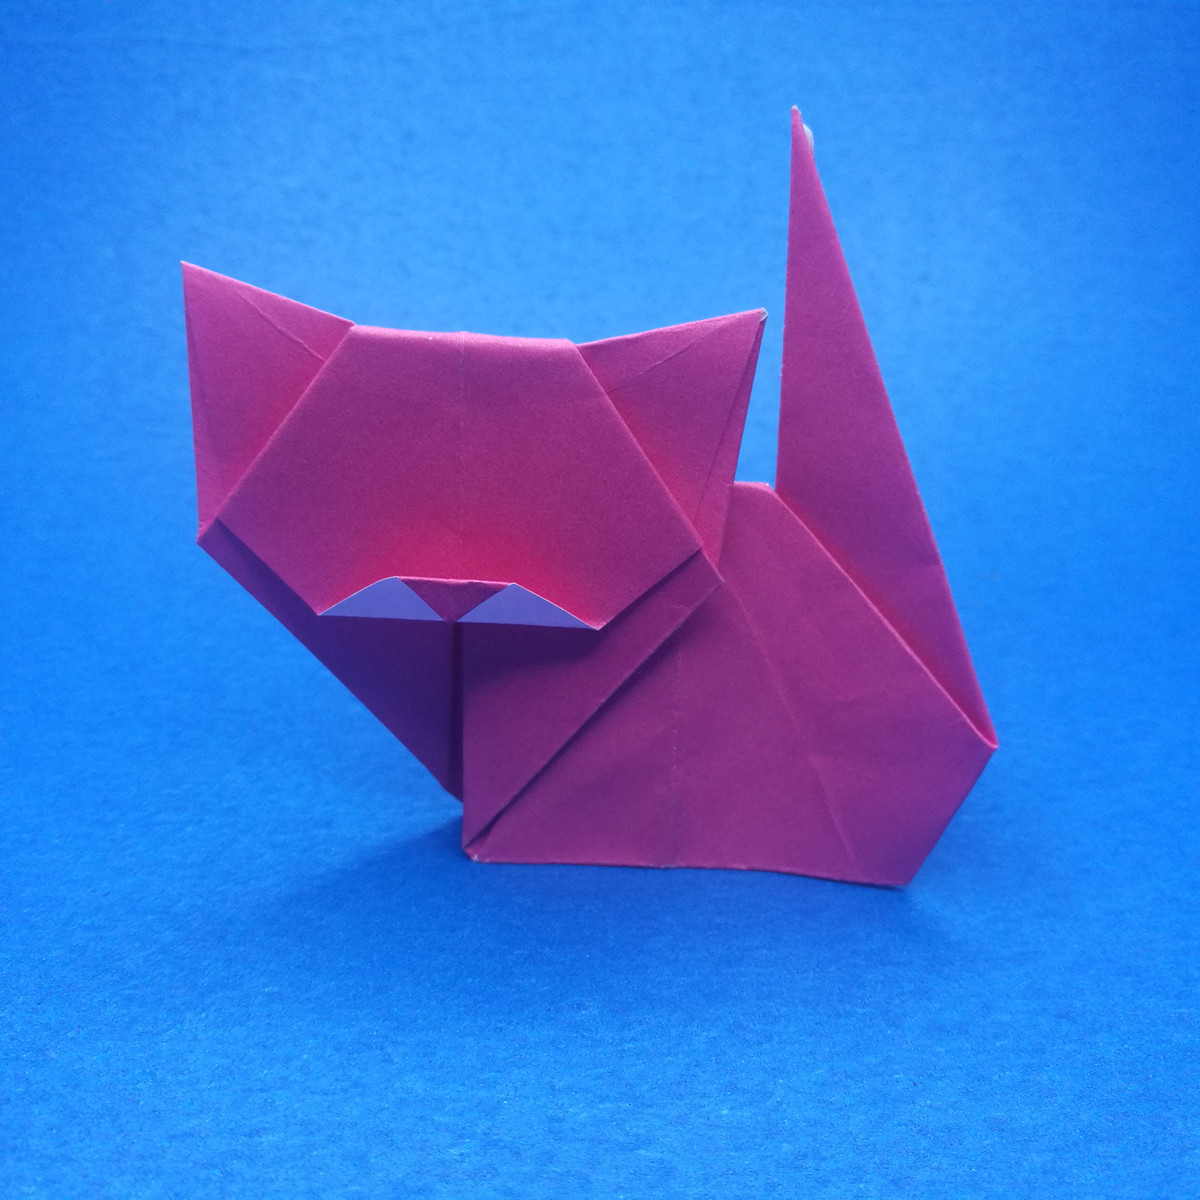 How To Make Origami Cat Origami Cat Step Step Instructions